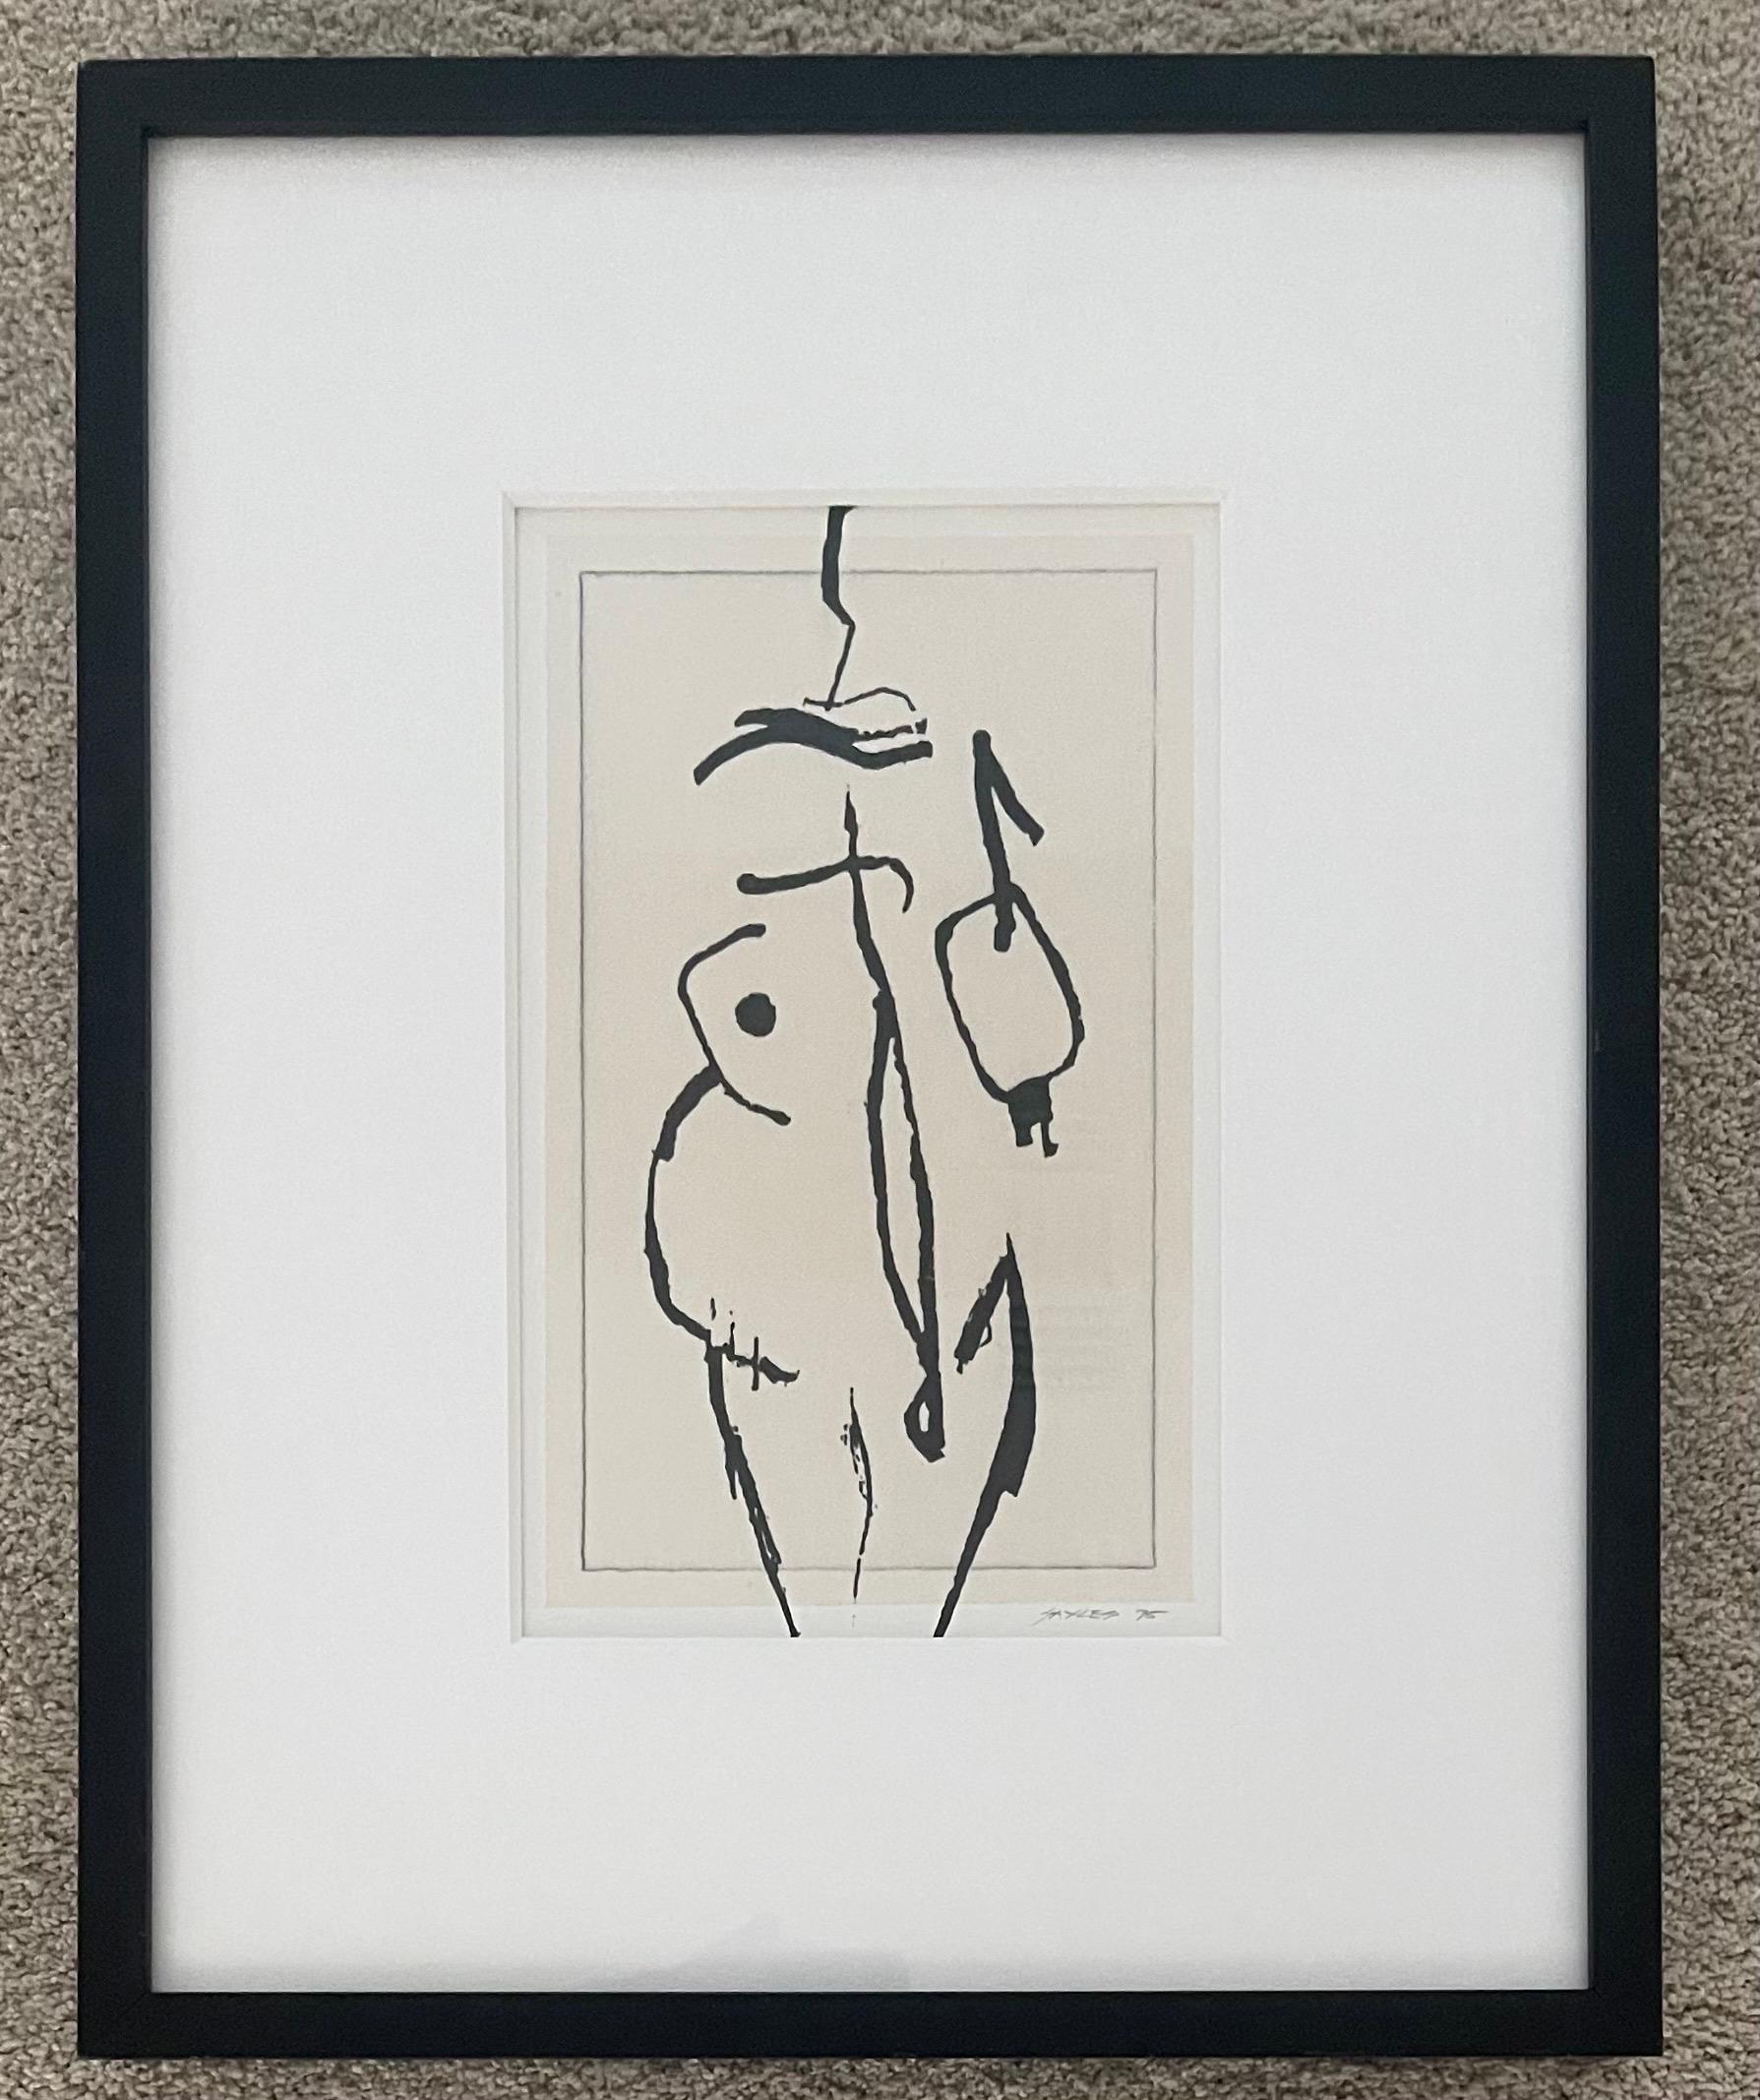 Contemporary abstract lithograph by artist Dan Sayles, circa 1995. This wonderful piece is presented in a black wood frame with white mat and measures 14.75